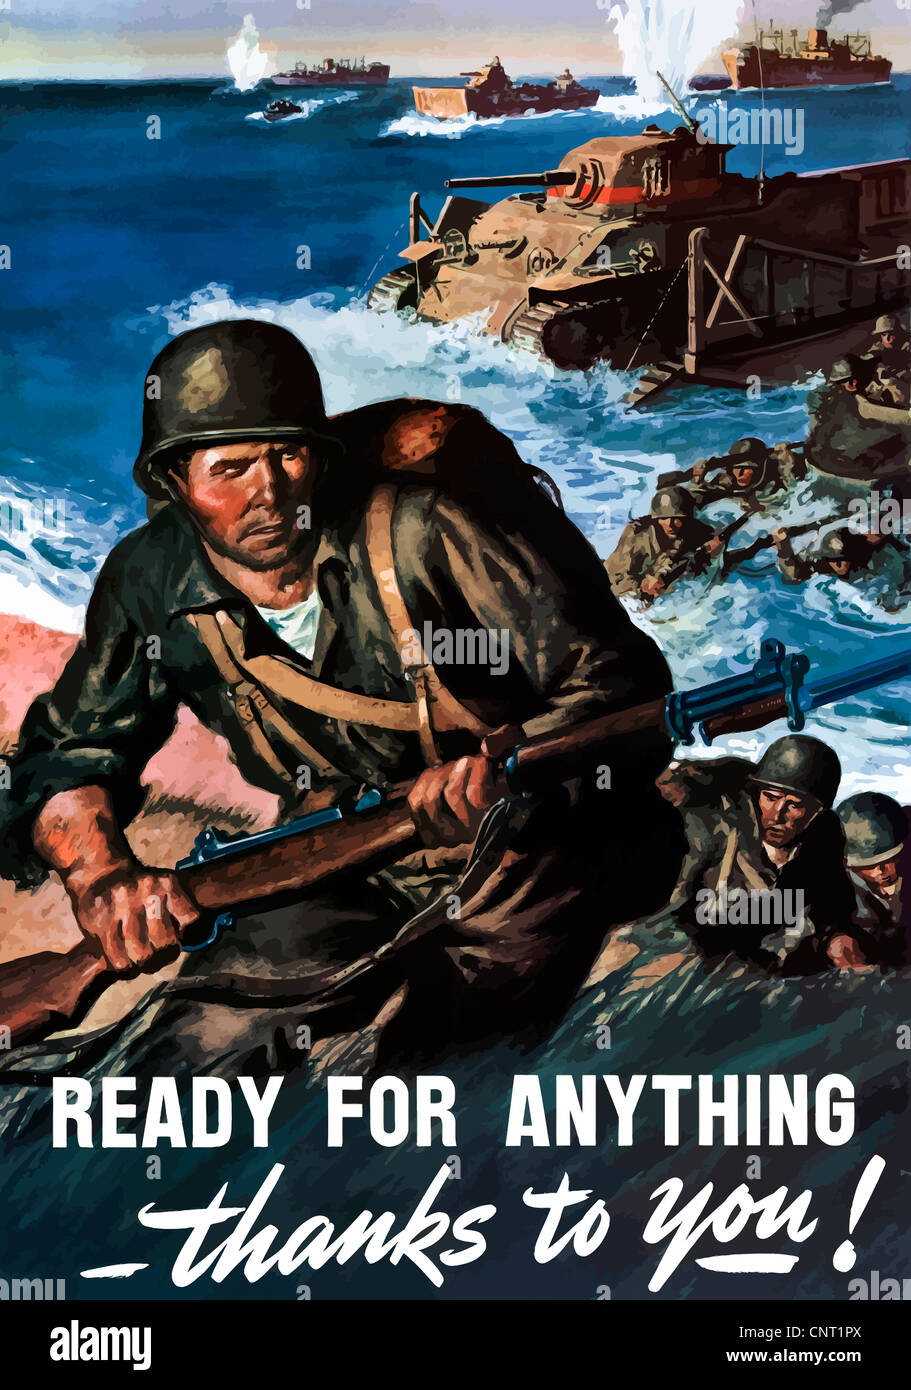 This vintage World War II poster features American soldiers and tanks storming the enemy beach under fire. Stock Photo